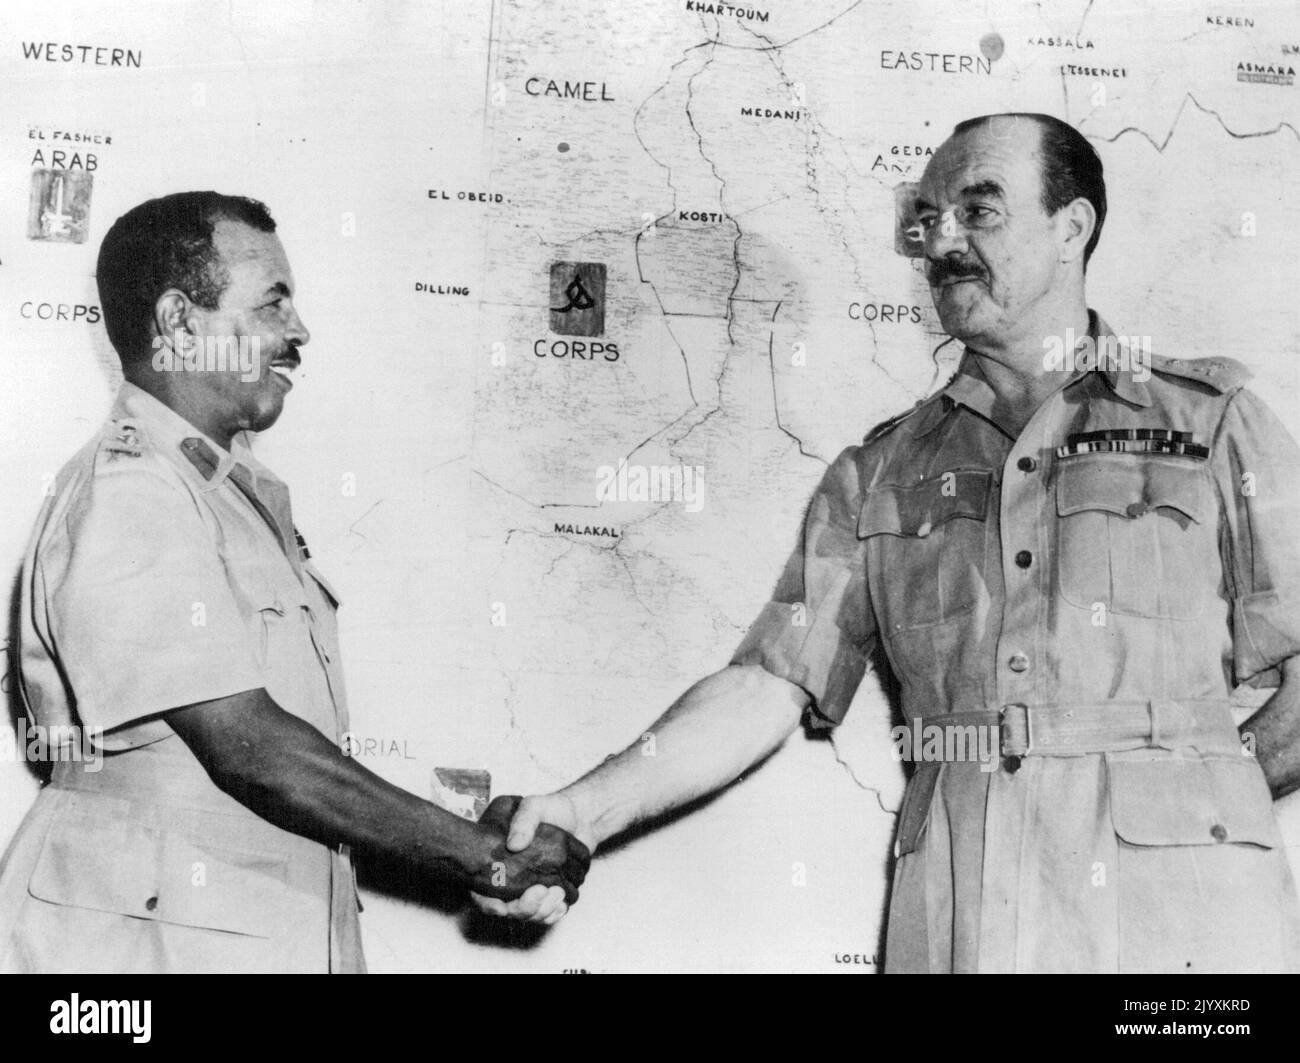 British General Flies Out From Sudan -- Major-General R.L. Scoones, C.B., D. S. O., O. B. E., says farewell to his deputy Commanding Officer, Brigadier Ahmed Pasha Mohammed, O. B. E., who is taking over the command. The change is being made as part of the policy of 'Sudanisation' of military forces control in the Sudan. General Scoones flew back to the UK by RAF plane from Khartoum airport. In the background is a map showing the province headquarters of the Sudan Defence Force Corps. August 17, 1954. (Photo by United Press Photo). Stock Photo